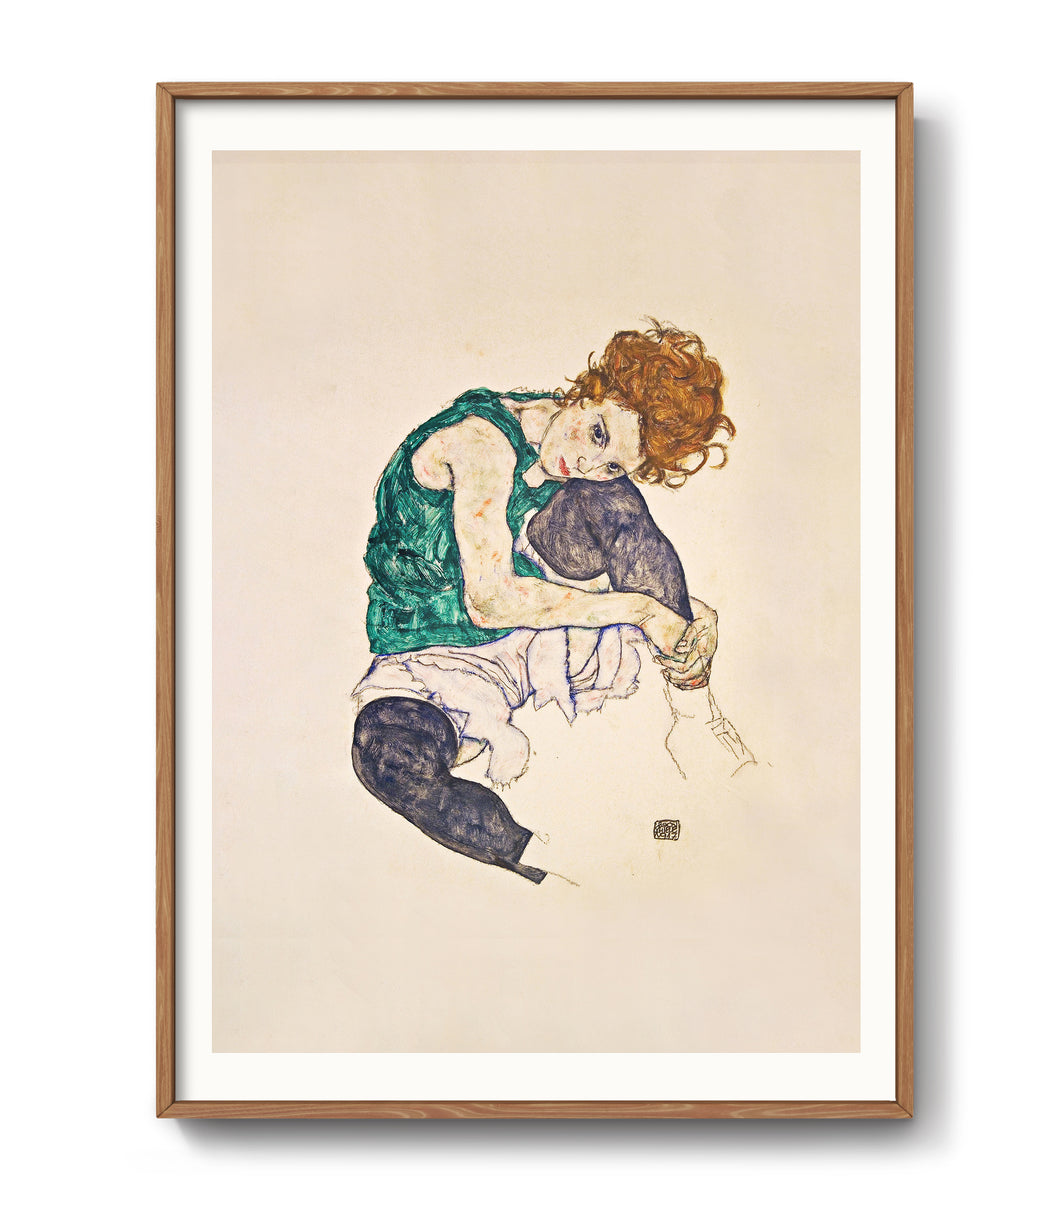 Seated Woman by Egon Schiele